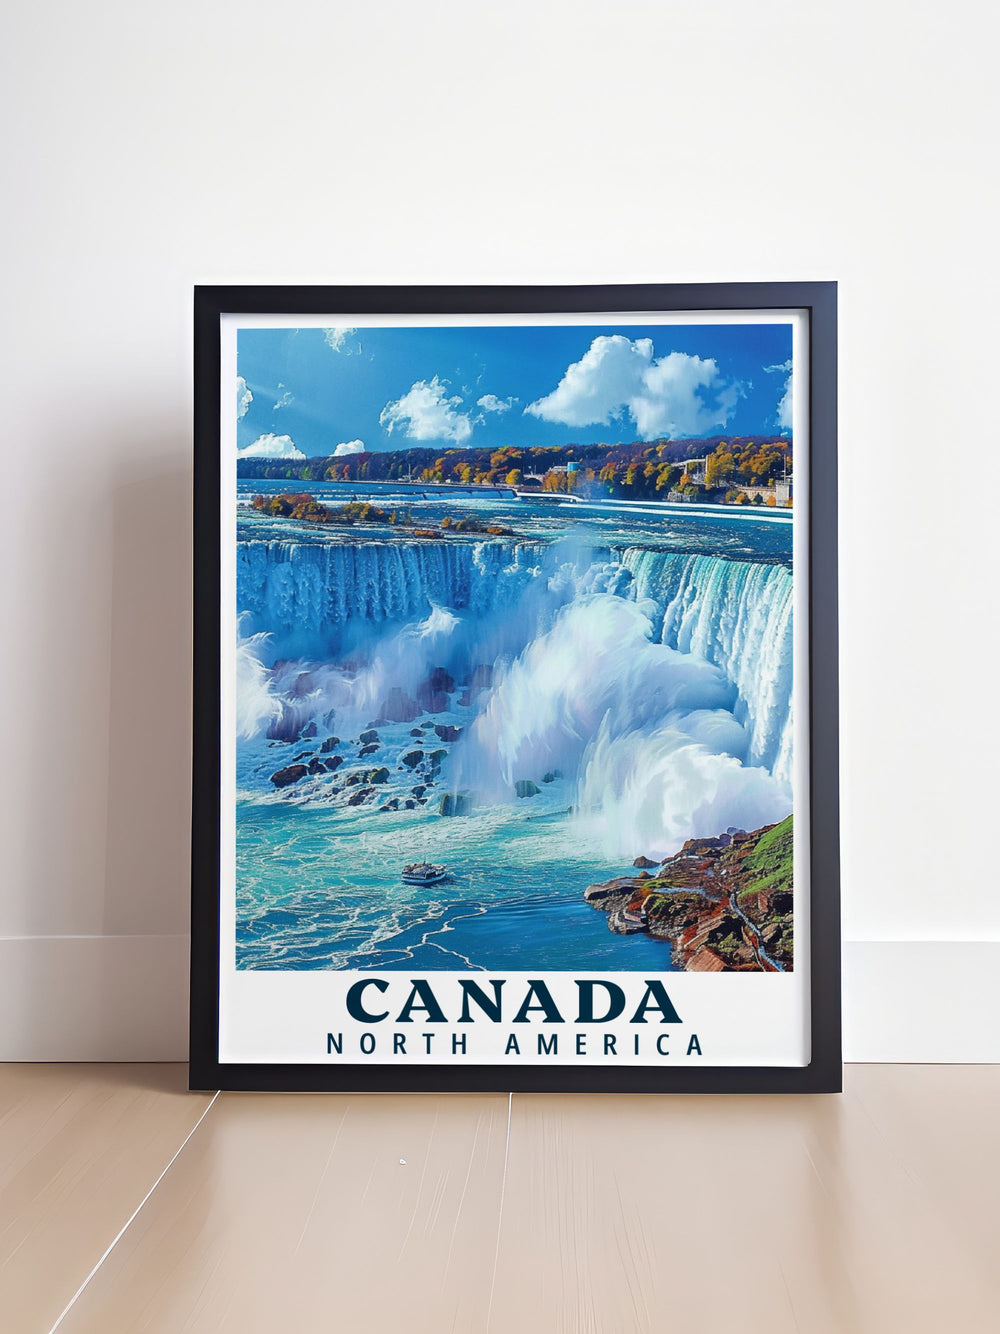 Featuring the powerful cascades of Niagara Falls and the surrounding lush greenery, this poster is ideal for those who wish to bring a piece of Canadas natural beauty into their home.